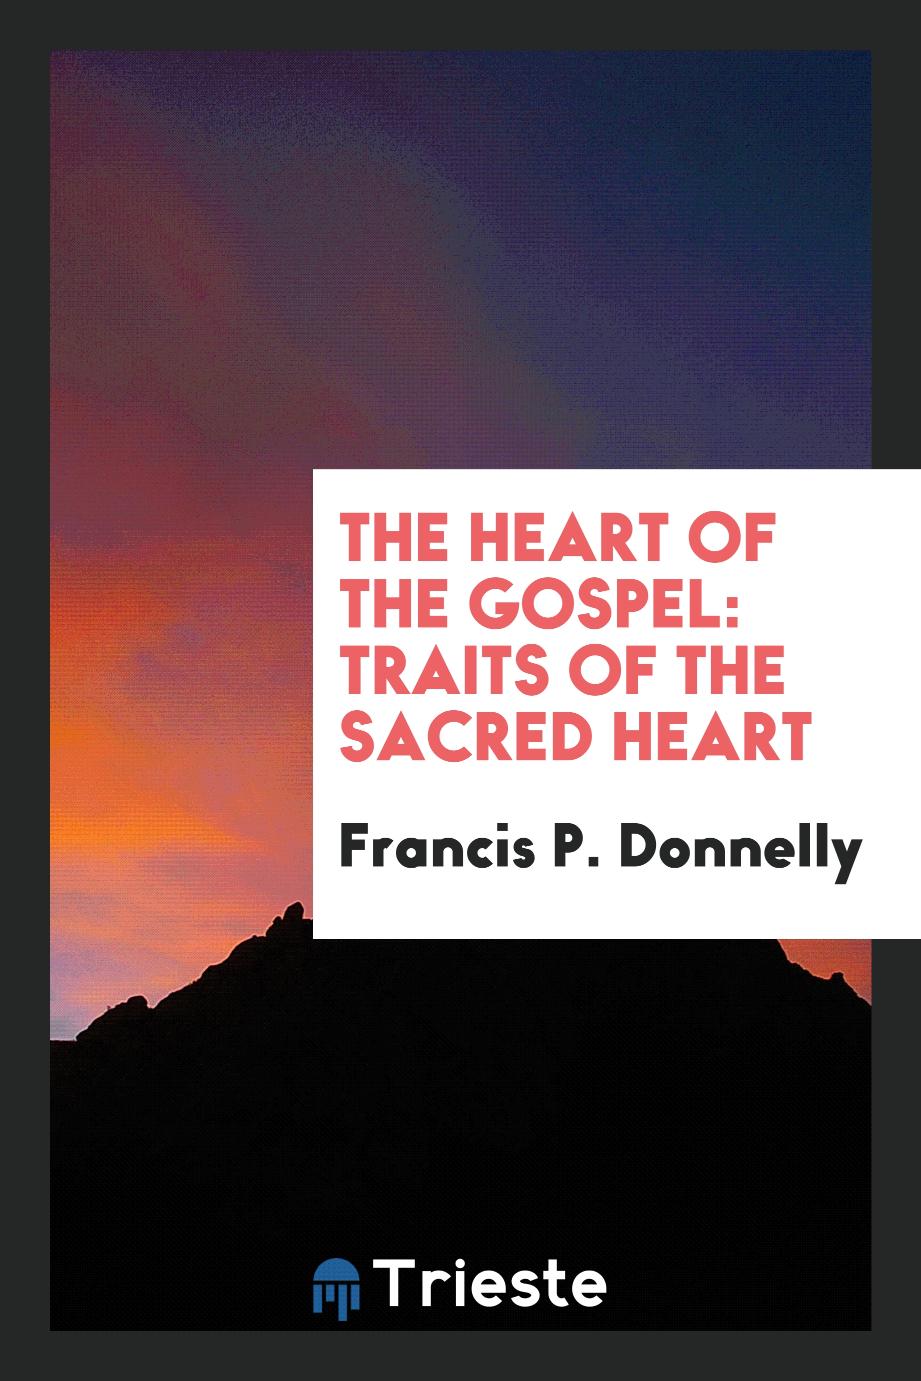 The heart of the Gospel: traits of the Sacred Heart